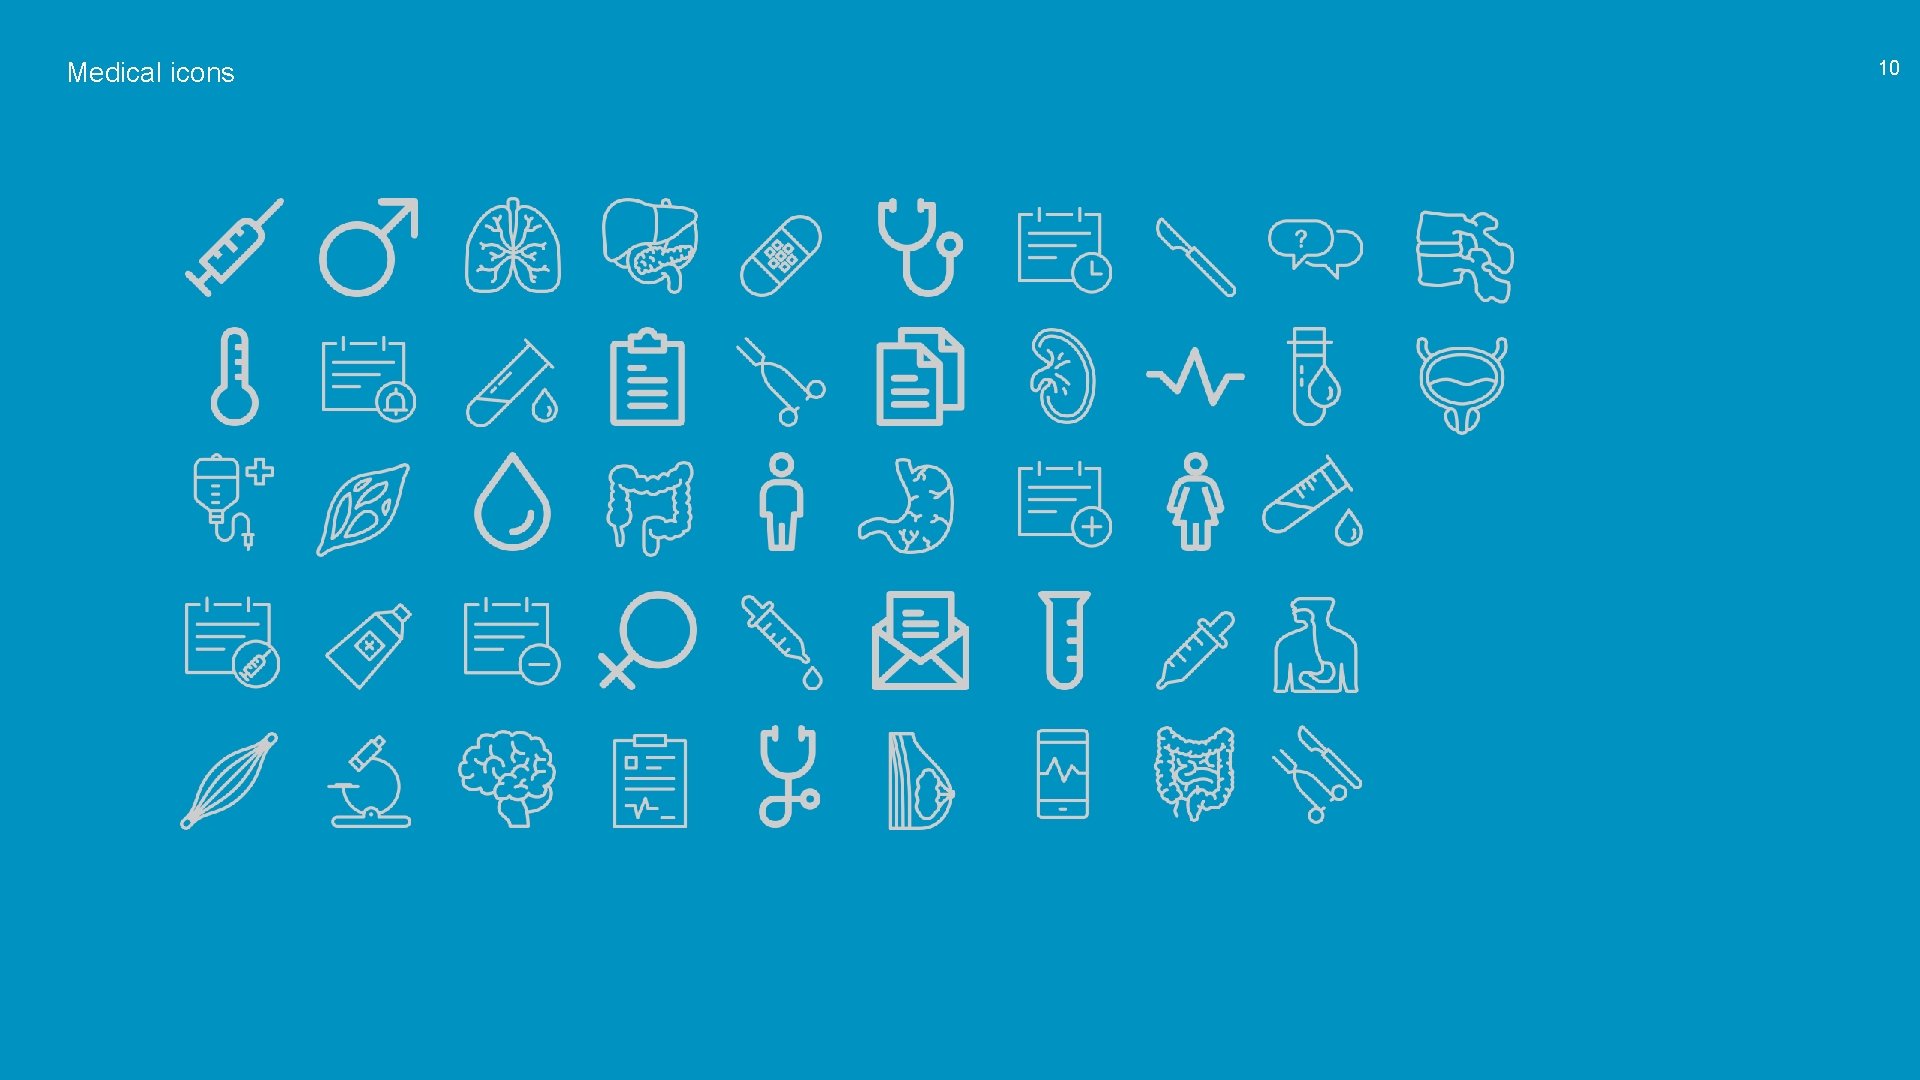 Medical icons 10 